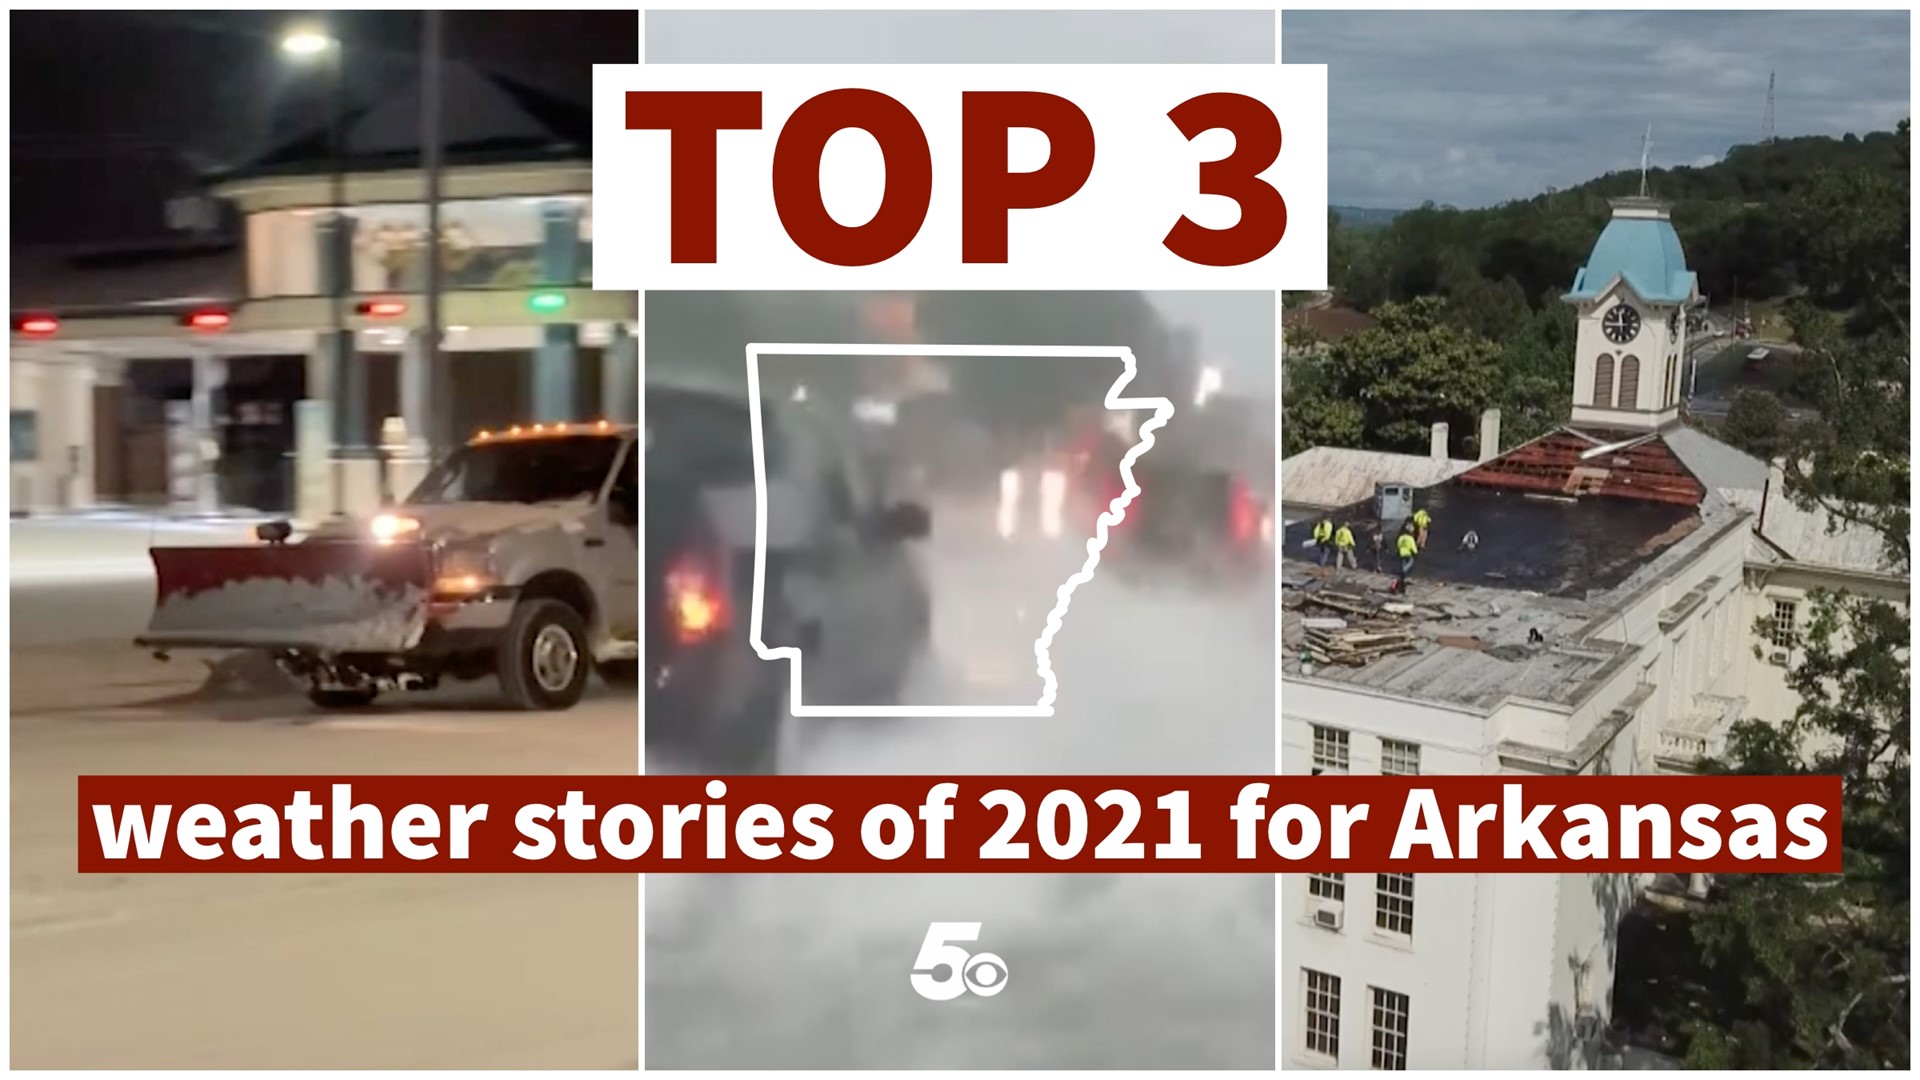 A record-breaking arctic blast, multiple flooding events, and tornadoes gave Arkansas and eastern Oklahoma quite a year for 2021.